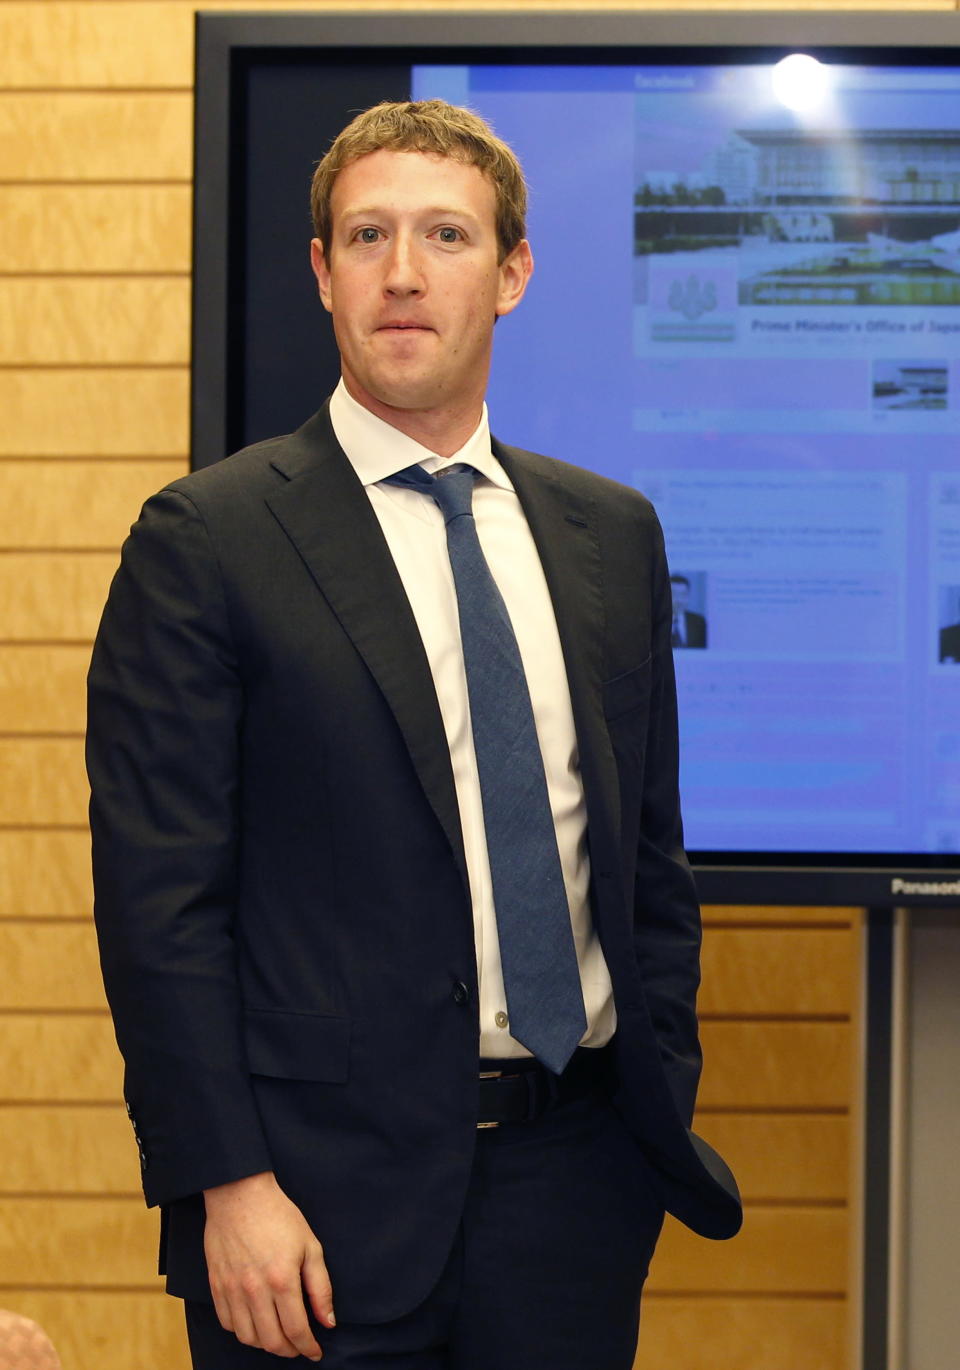 <p><b>9. Mark Zuckerberg, 27</b></p> <p>Company: Facebook</p> <p>Net worth: $18.1 billion</p> <p>2011 compensation: $1.49 million</p> <p>At 27-years-old, Mark Zuckerberg is the youngest CEO on the list. As the founder and CEO of the world’s largest social networking website with 845 million monthly users, Zuckerberg is likely to leap up the rankings once Facebook goes public this year. His roughly 28 percent stake in the company is valued at $17.9 billion, according to Wealth-X. The tech giant’s highly-anticipated $5 billion IPO could value the company at $100 billion and push Zuckerberg’s net worth up to $28 billion.</p> <p>Zuckerberg co-founded Facebook with friends in his Harvard University dorm in 2004 as a way to connect the university’s students. He dropped out of Harvard to expand the social networking site globally. Facebook’s growth has catapulted the company’s revenue to $3.71 billion in 2011 and its workforce has grown to 3,200. Worldwide, users spend about six hours a month on Facebook, and a recent survey revealed that long-time users are not tiring of posting personal details on the social media site. </p> <p>Despite plans to take the company public this year, Zuckerberg will keep almost complete control over the social media enterprise. Its IPO prospectus states that Zuckerberg will “control all matters” submitted to stockholders for vote, along with the overall management and direction of the firm.</p>